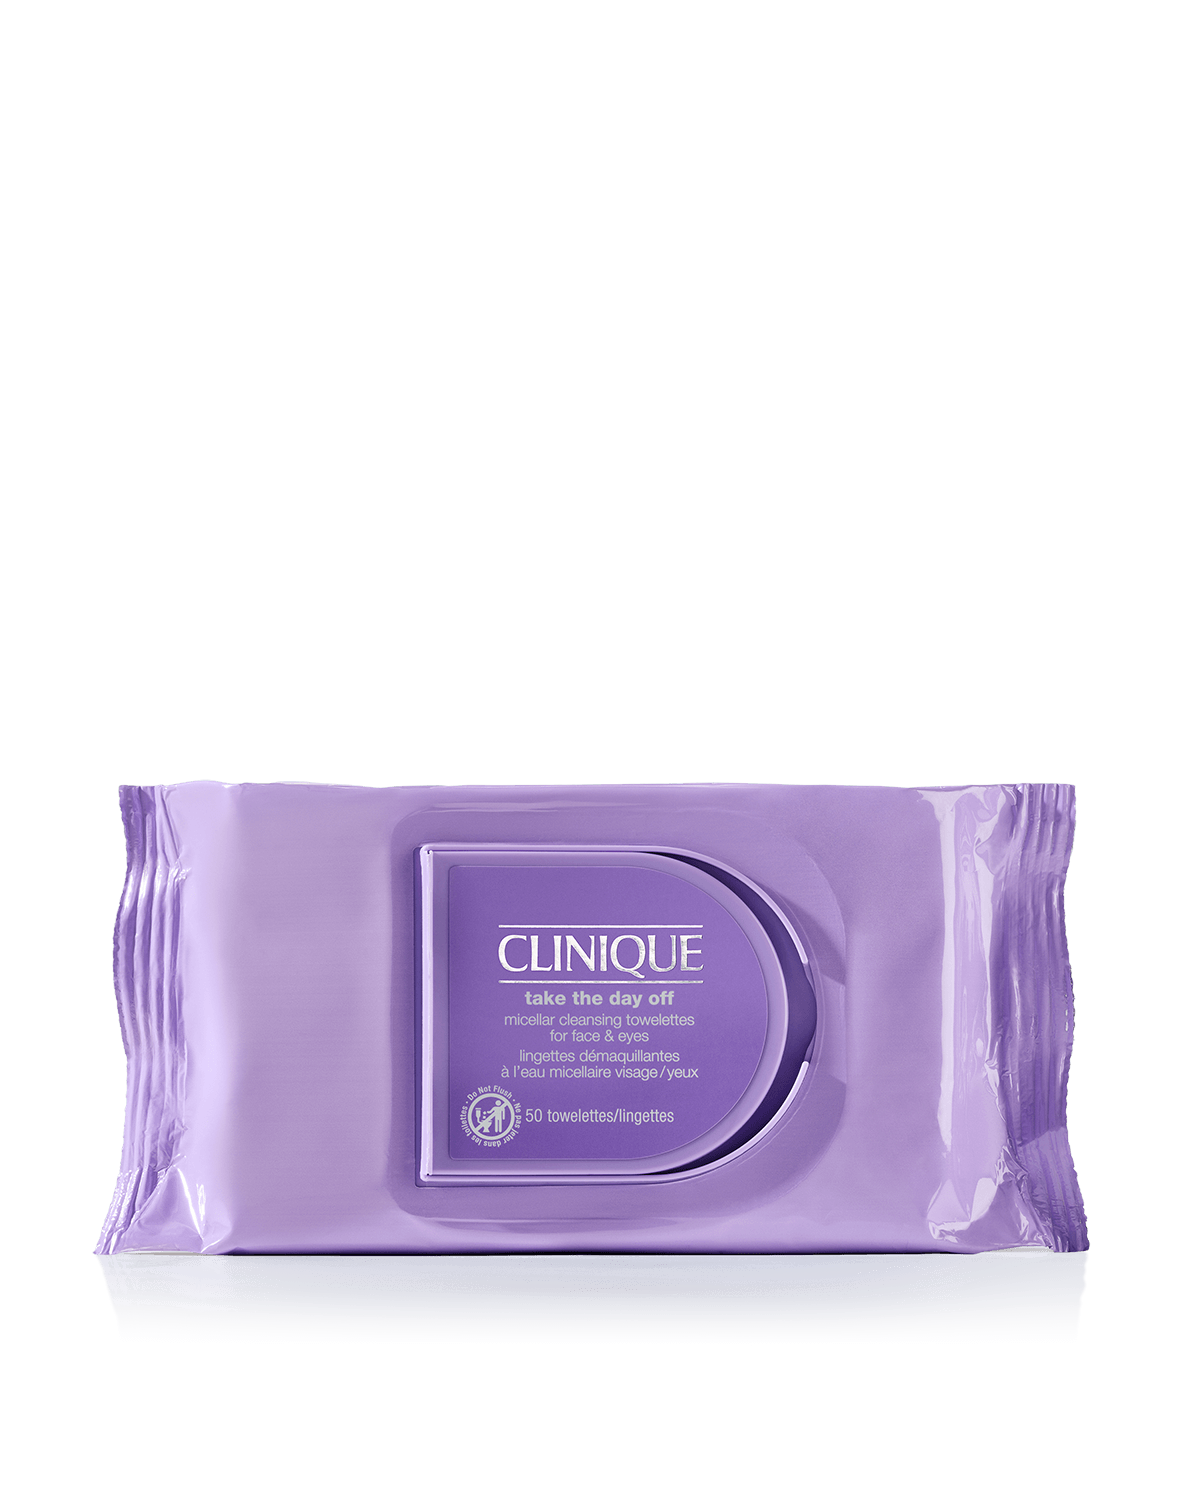 Off Micellar Cleansing Towelettes